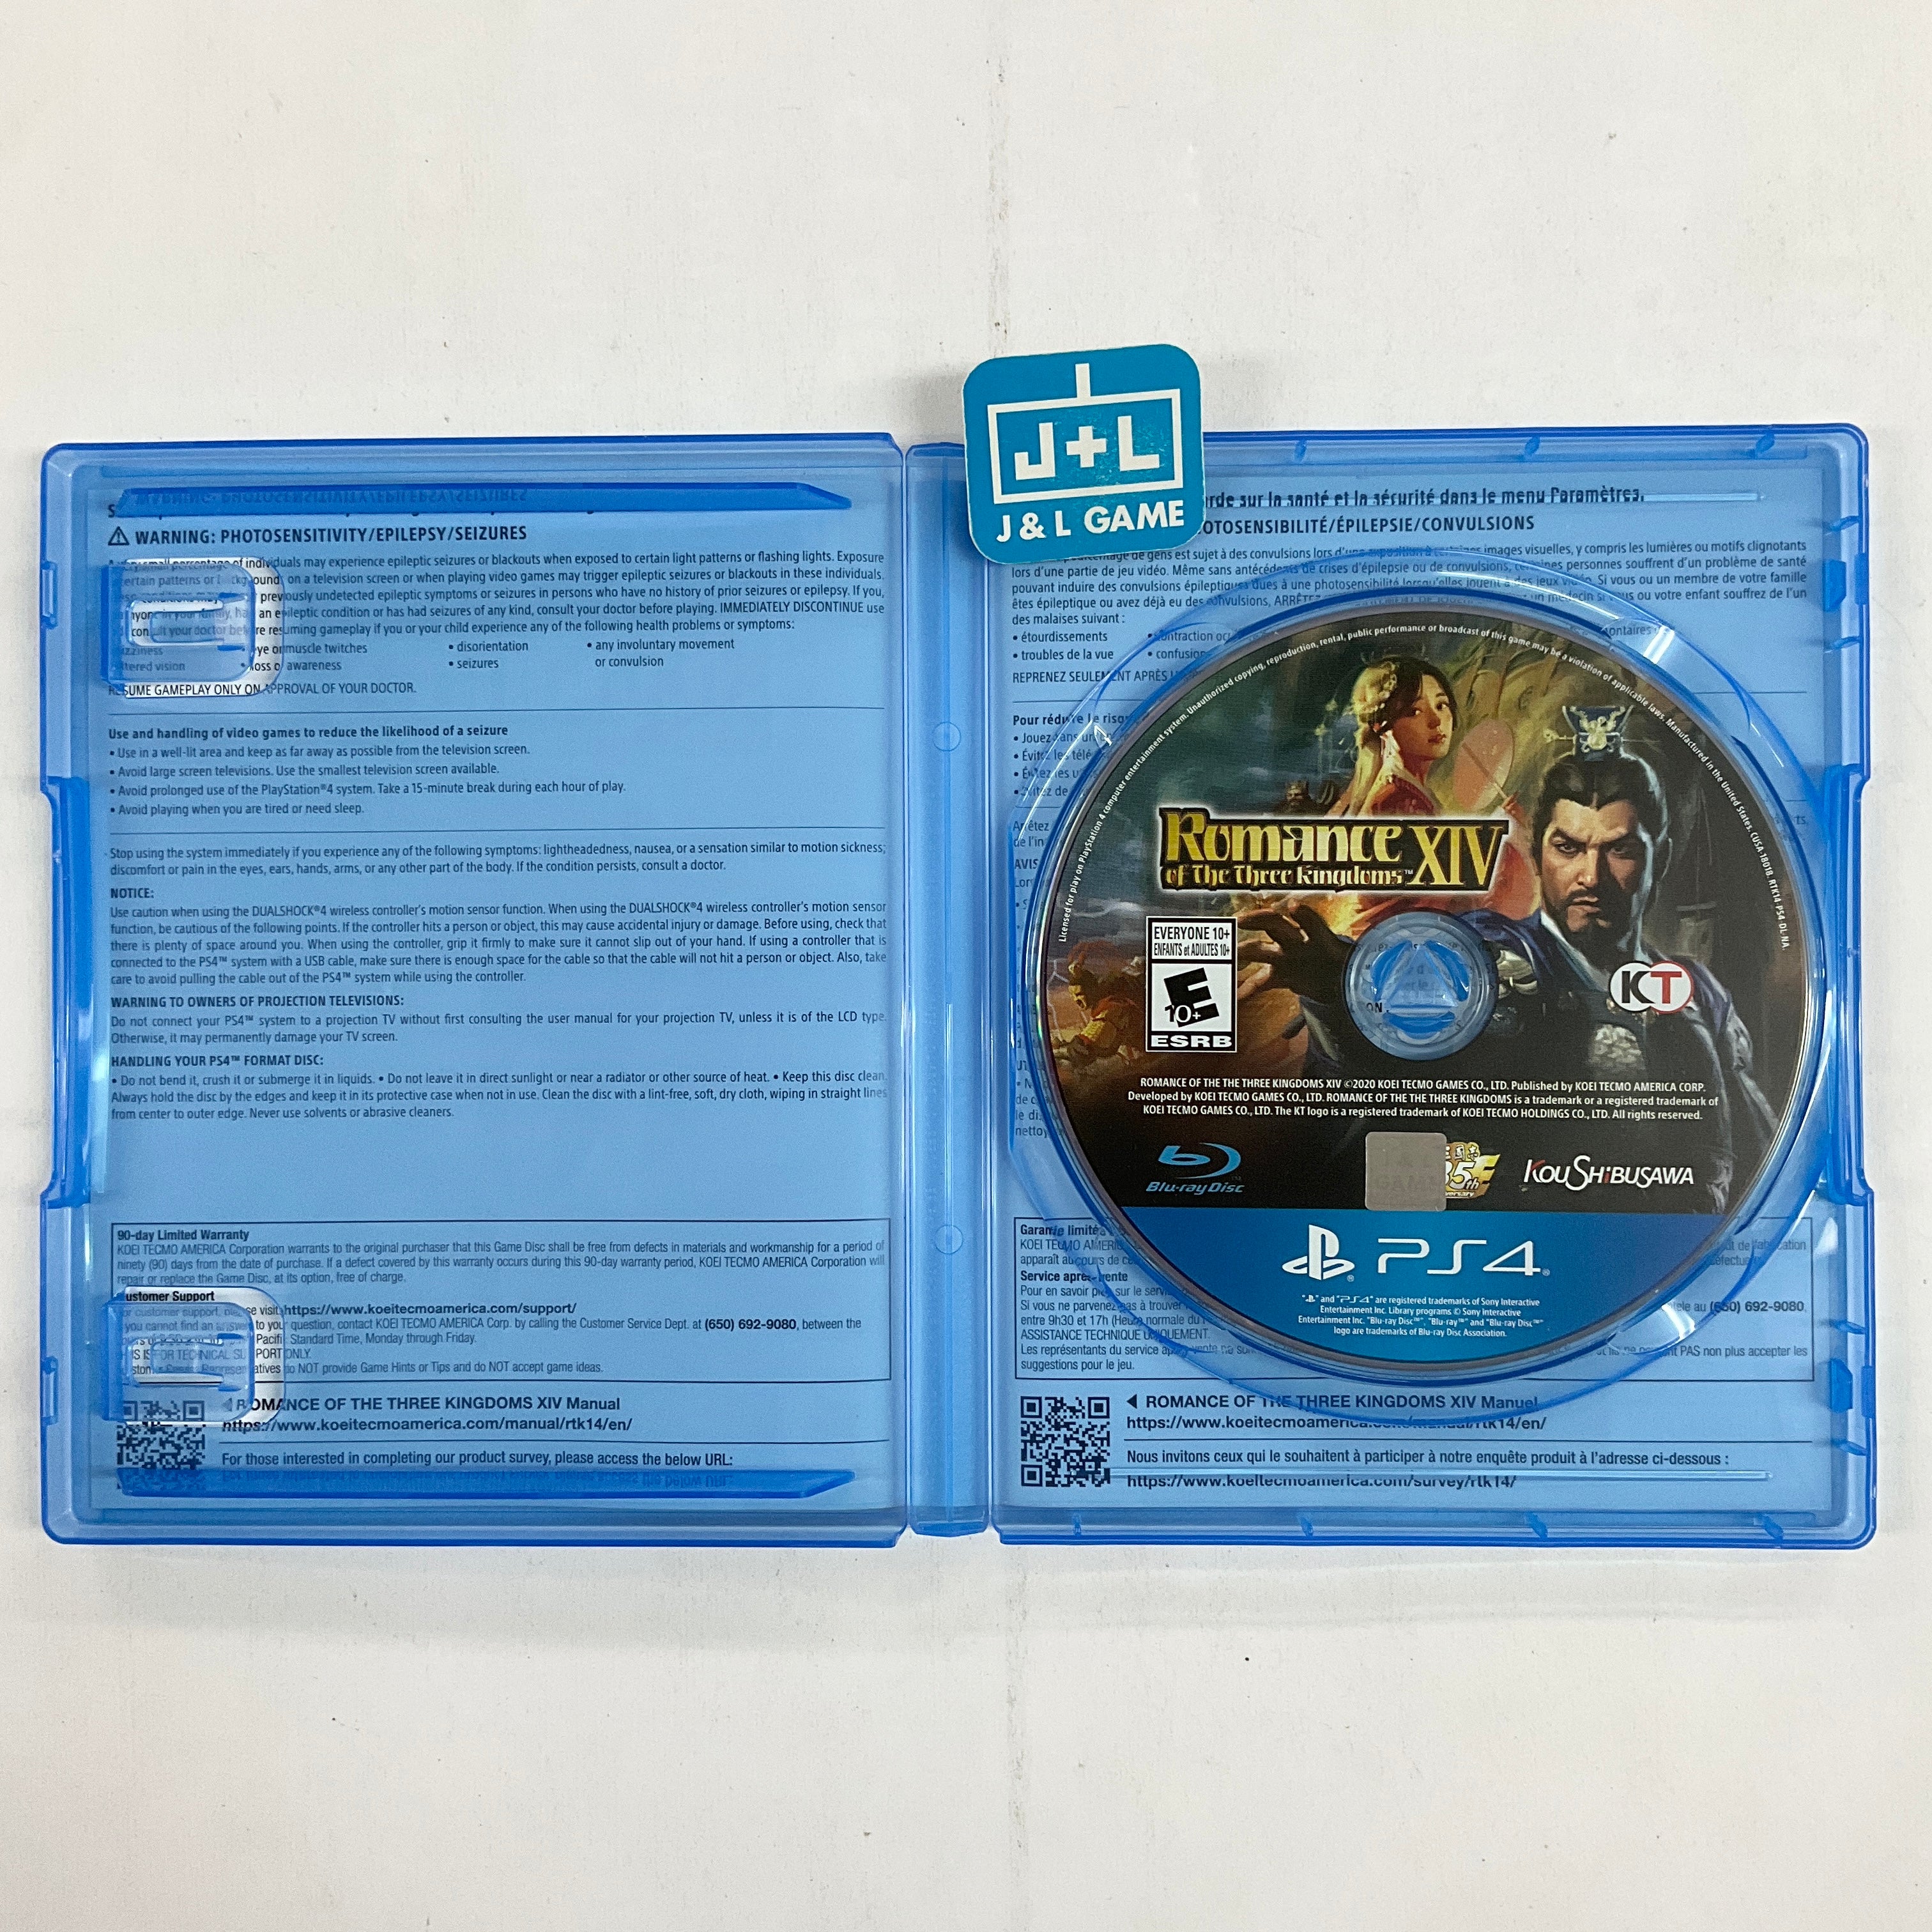 Romance of the Three Kingdoms XIV - (PS4) PlayStation 4 [Pre-Owned] Video Games KT   